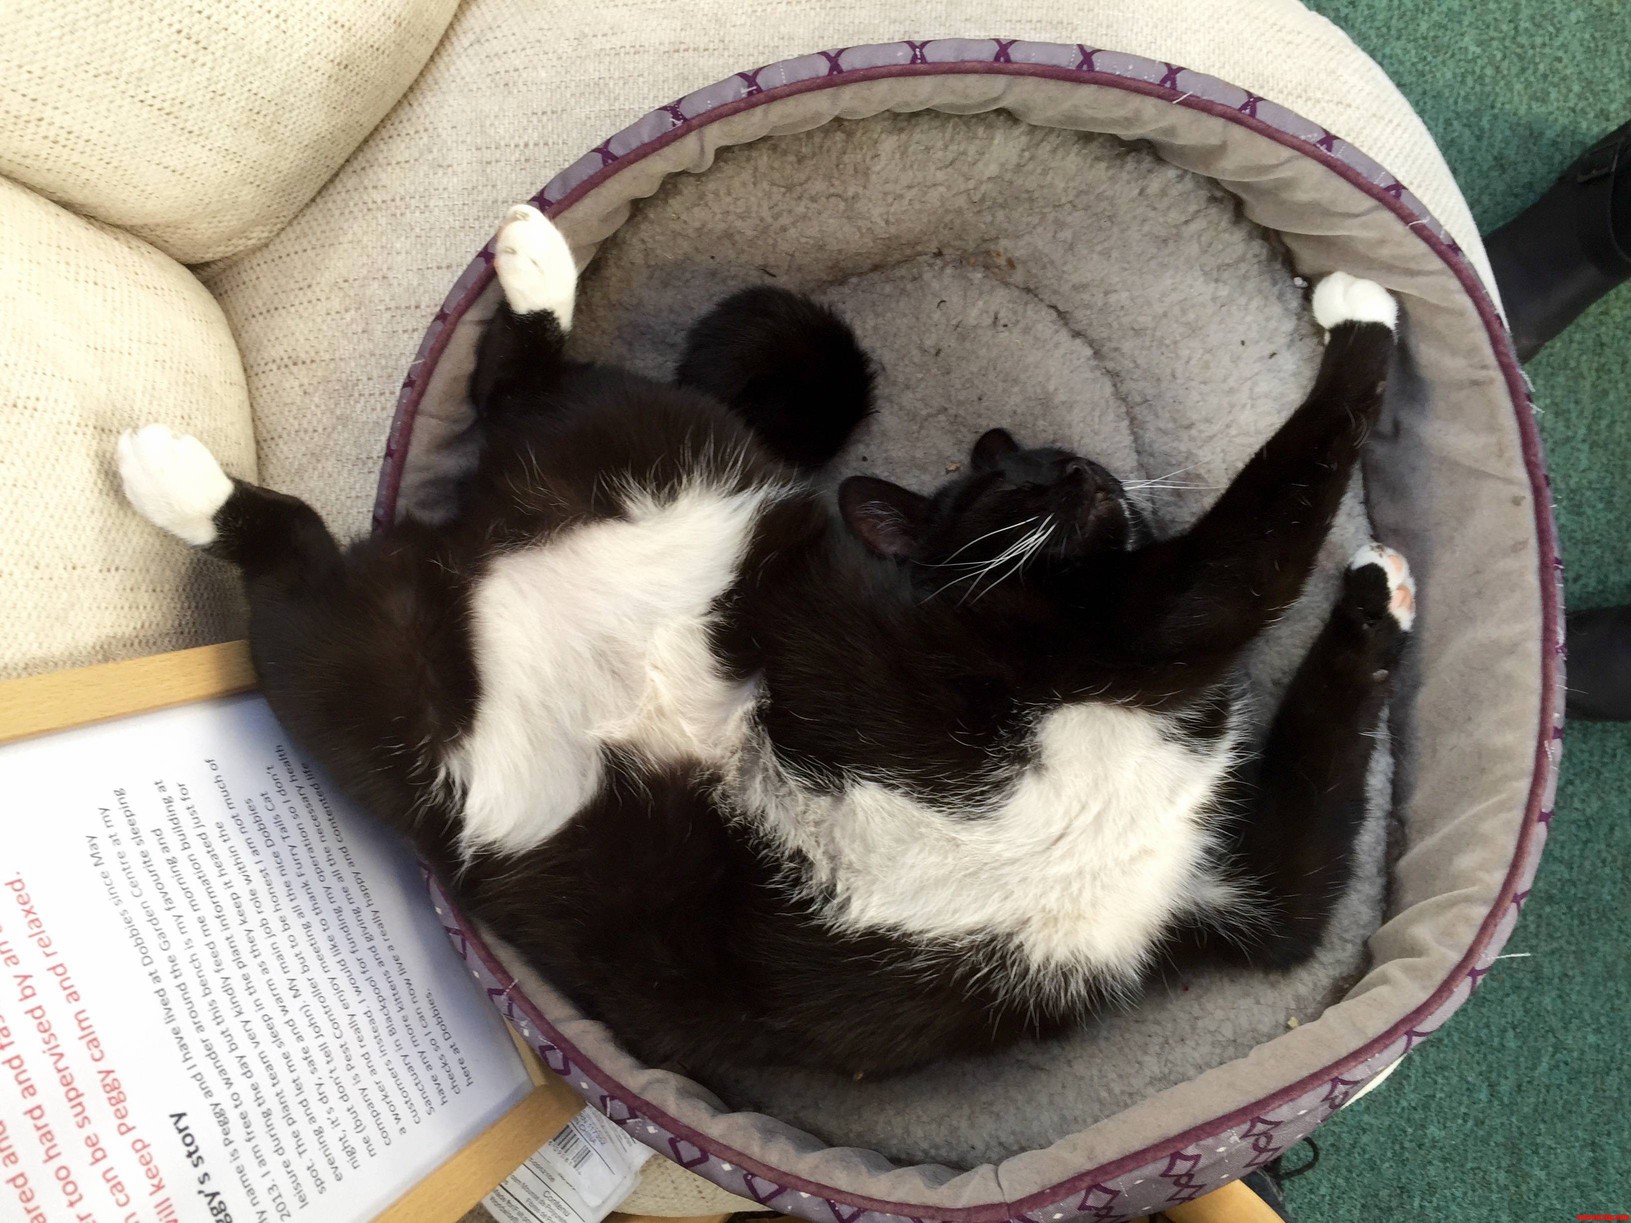 Peggy is my local garden centres cat. this is how she sleeps.